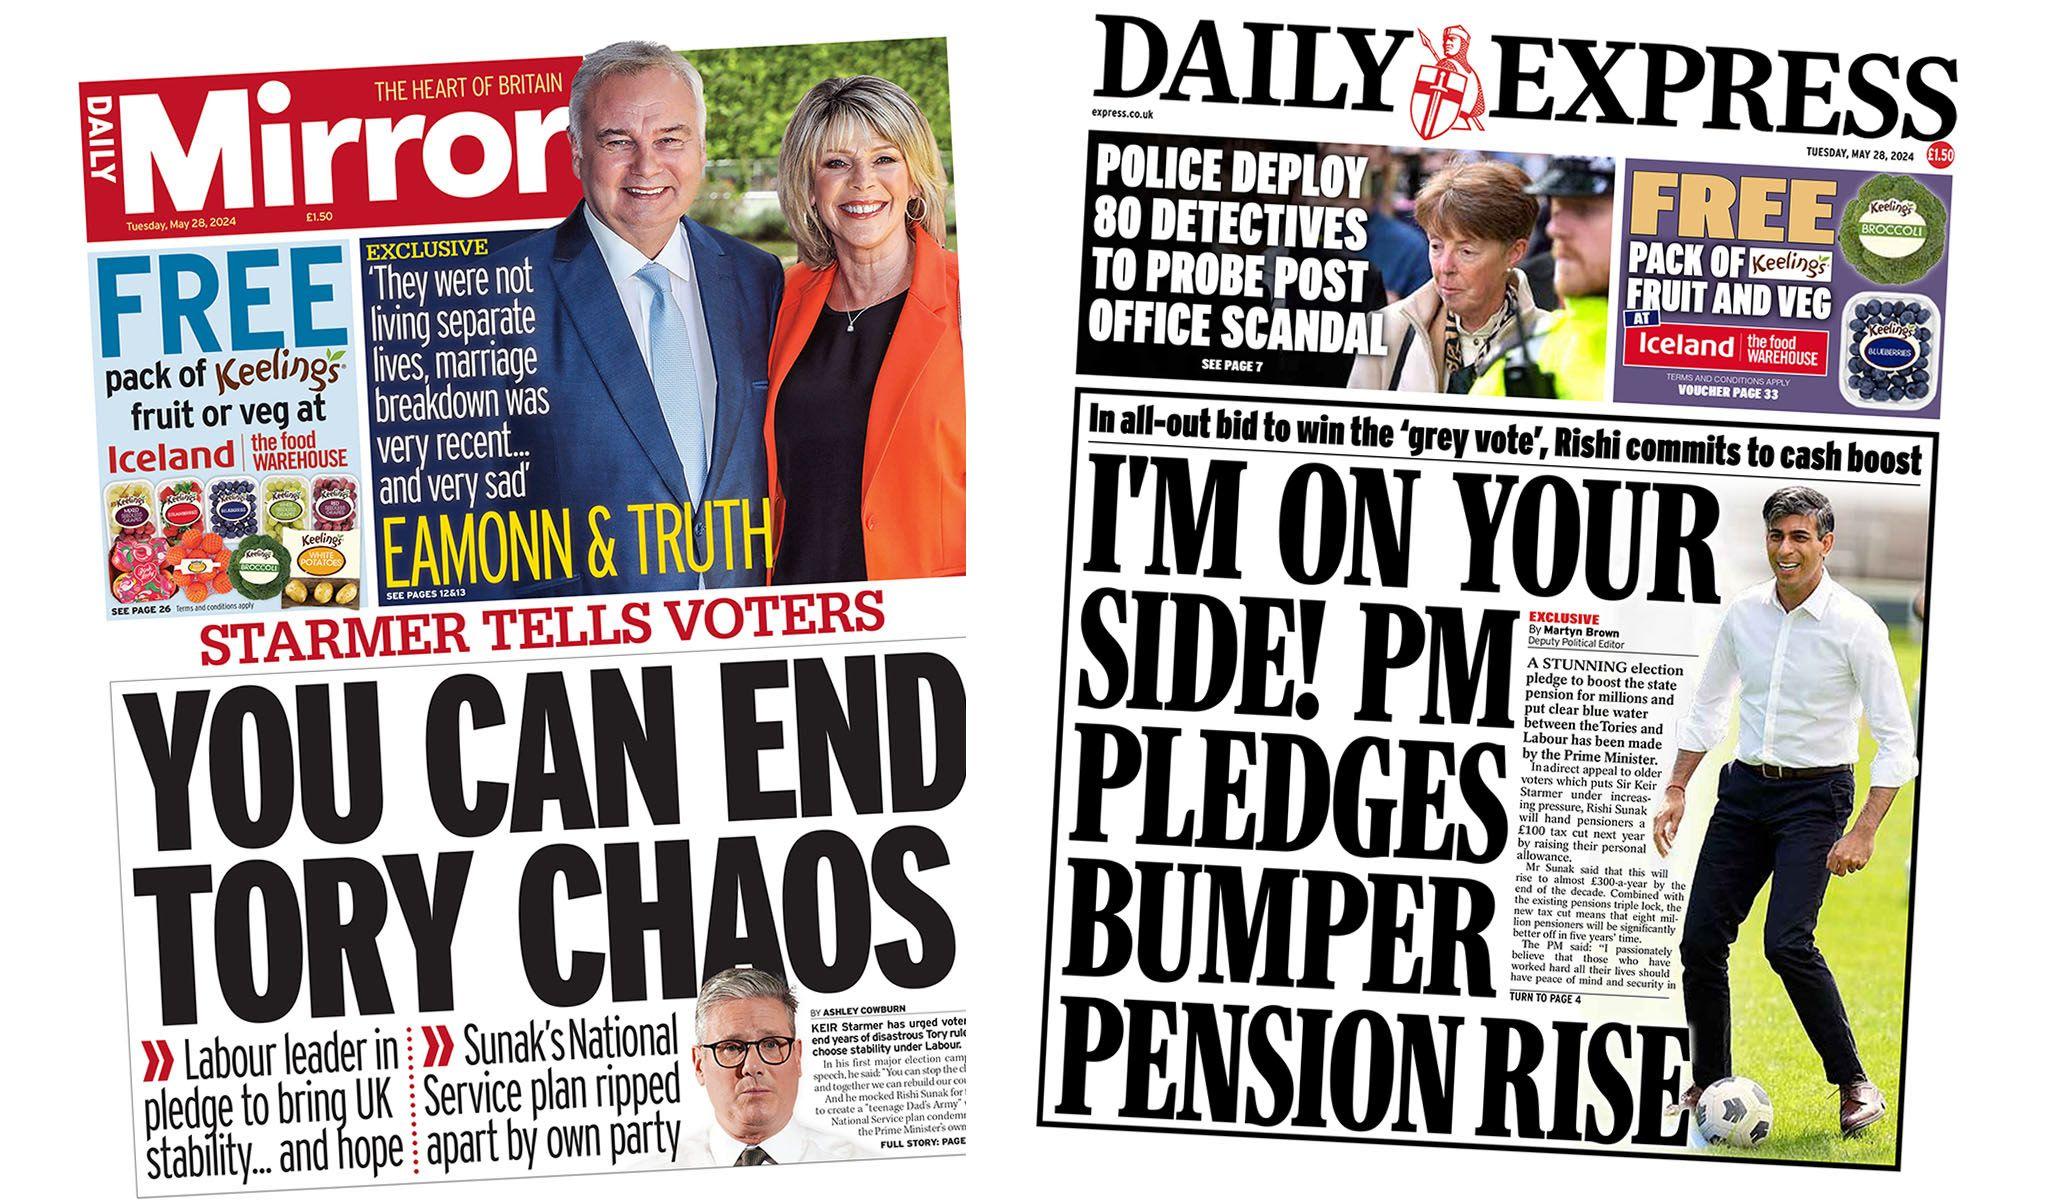 'End Tory chaos' and 'PM's pensioner tax cut'